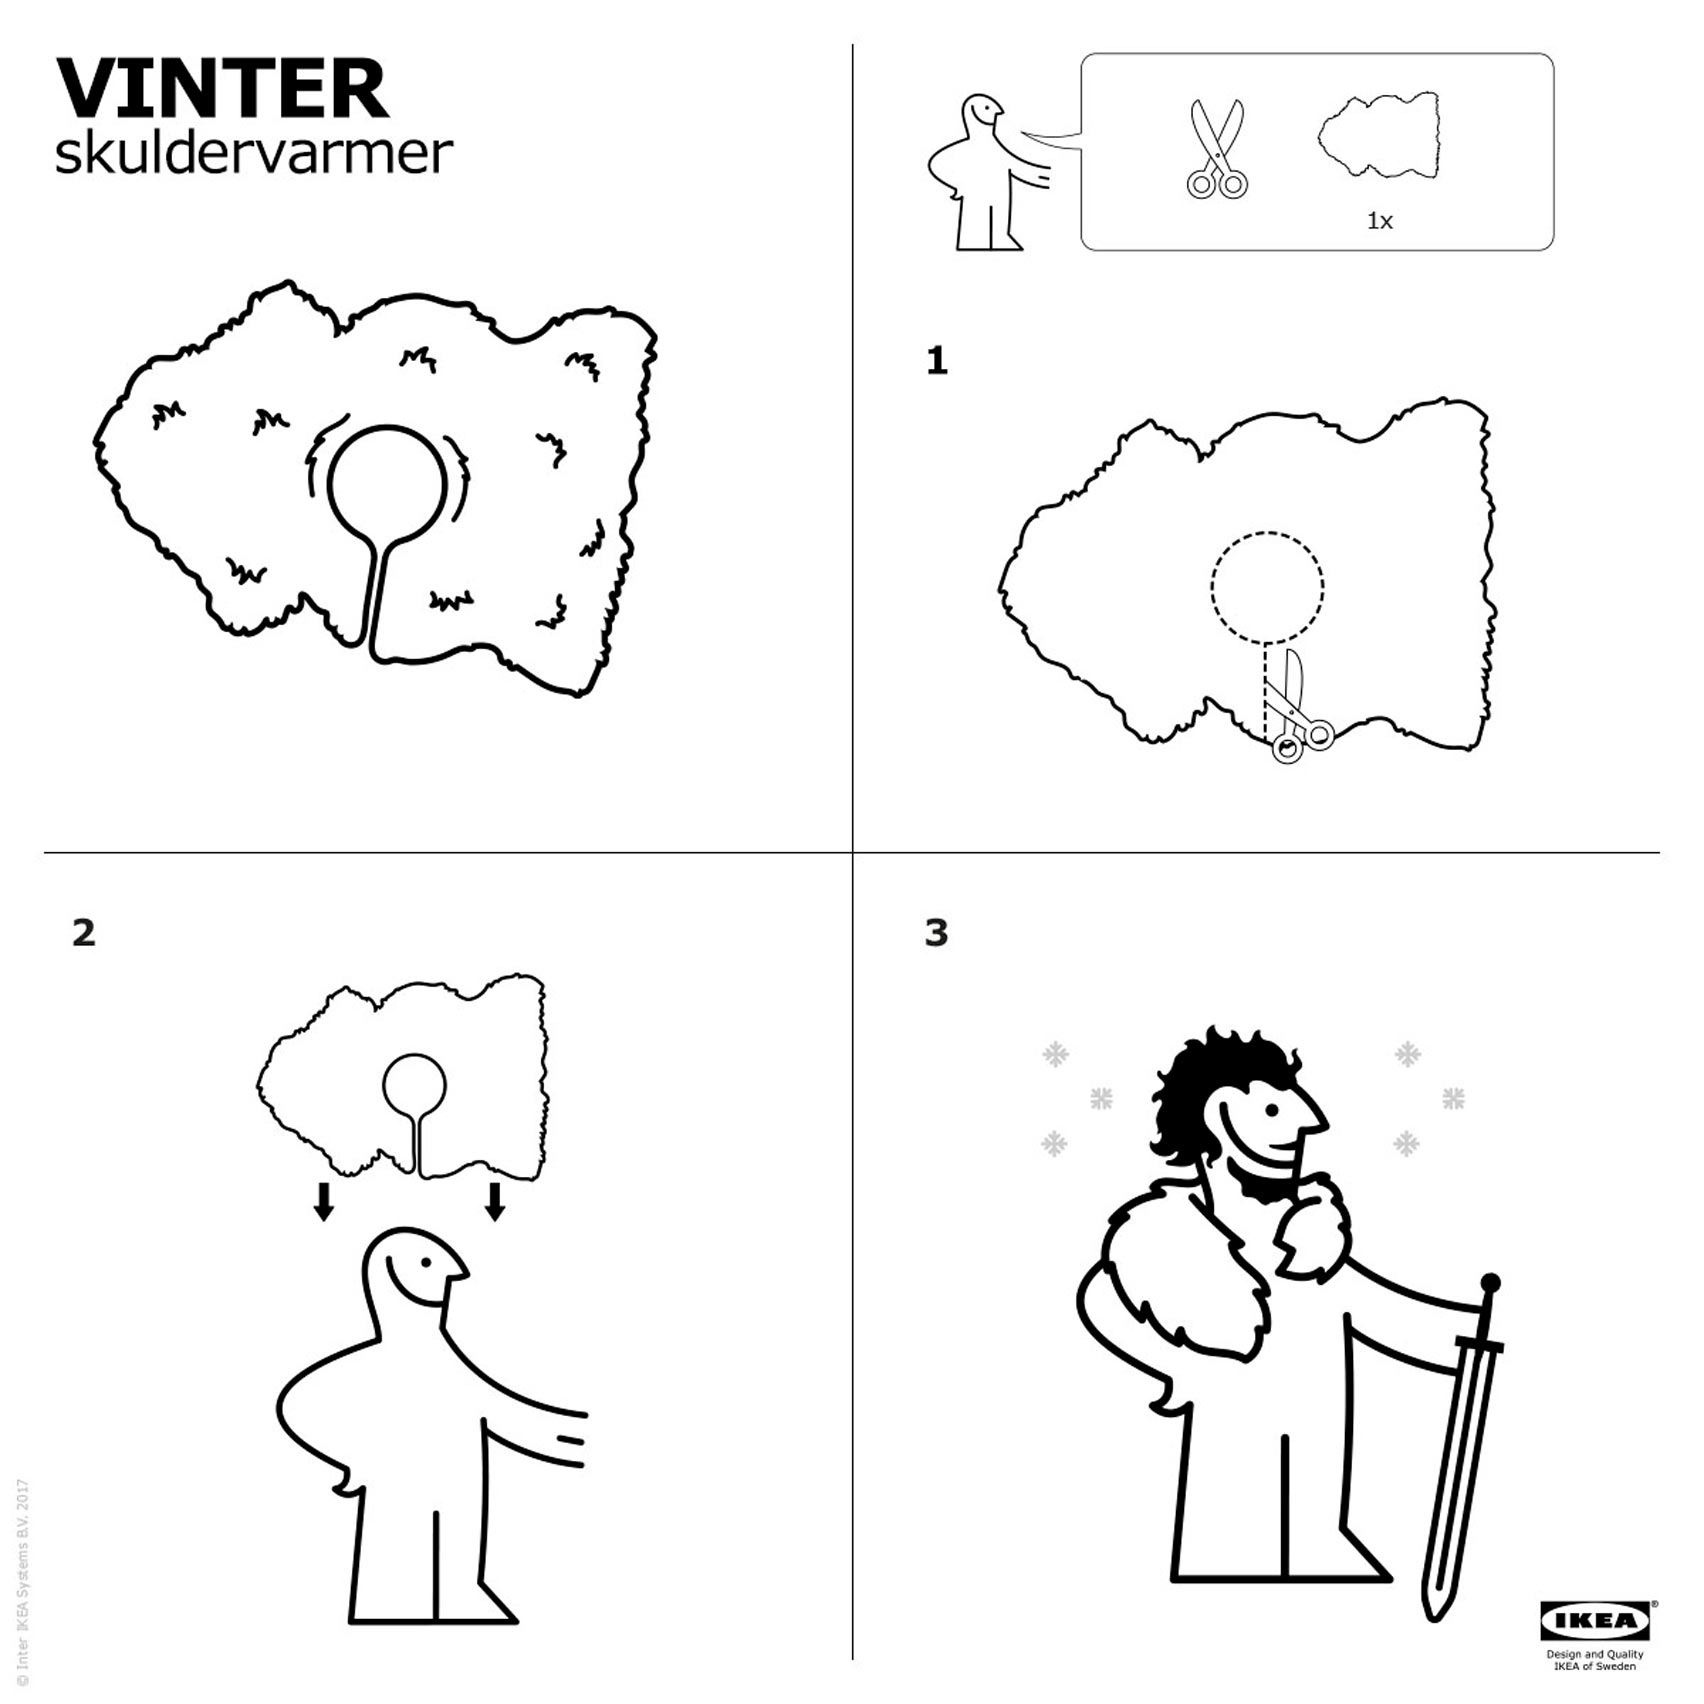 IKEA spoof instructions for a Game of Thrones cape